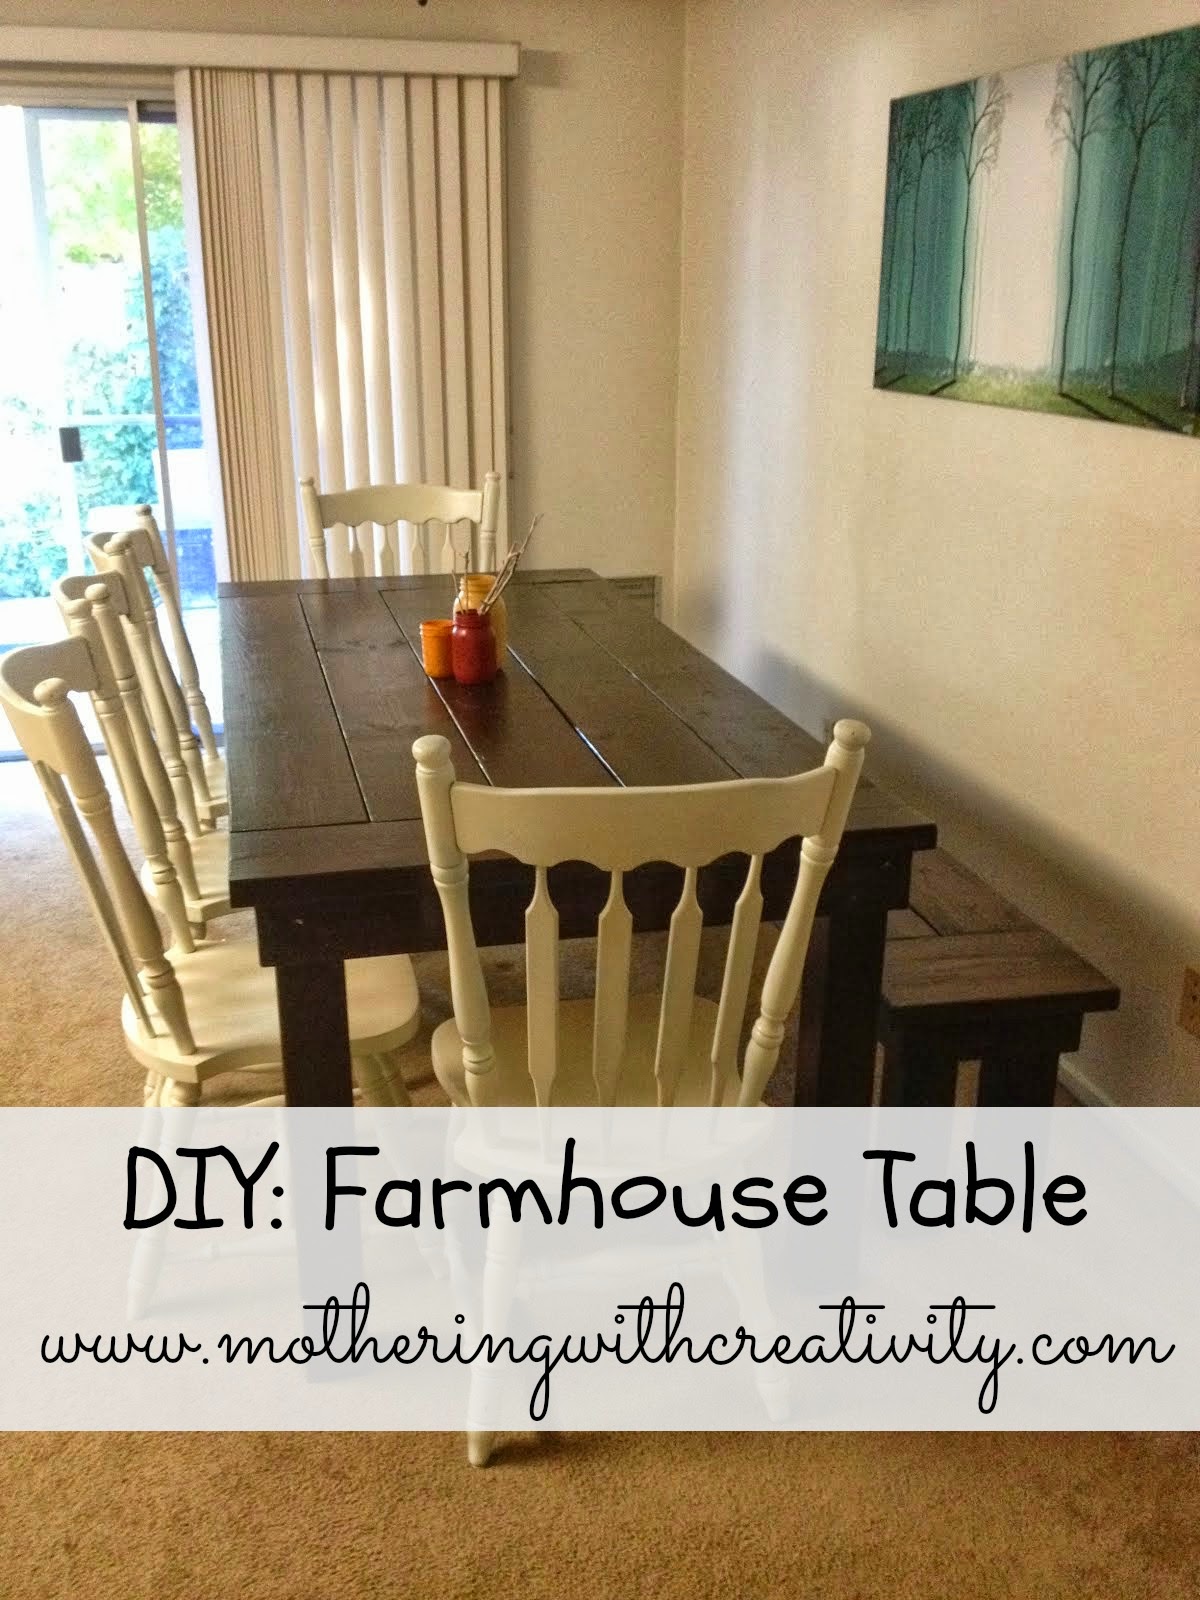 Mothering with Creativity: DIY 7-Foot Farmhouse Table